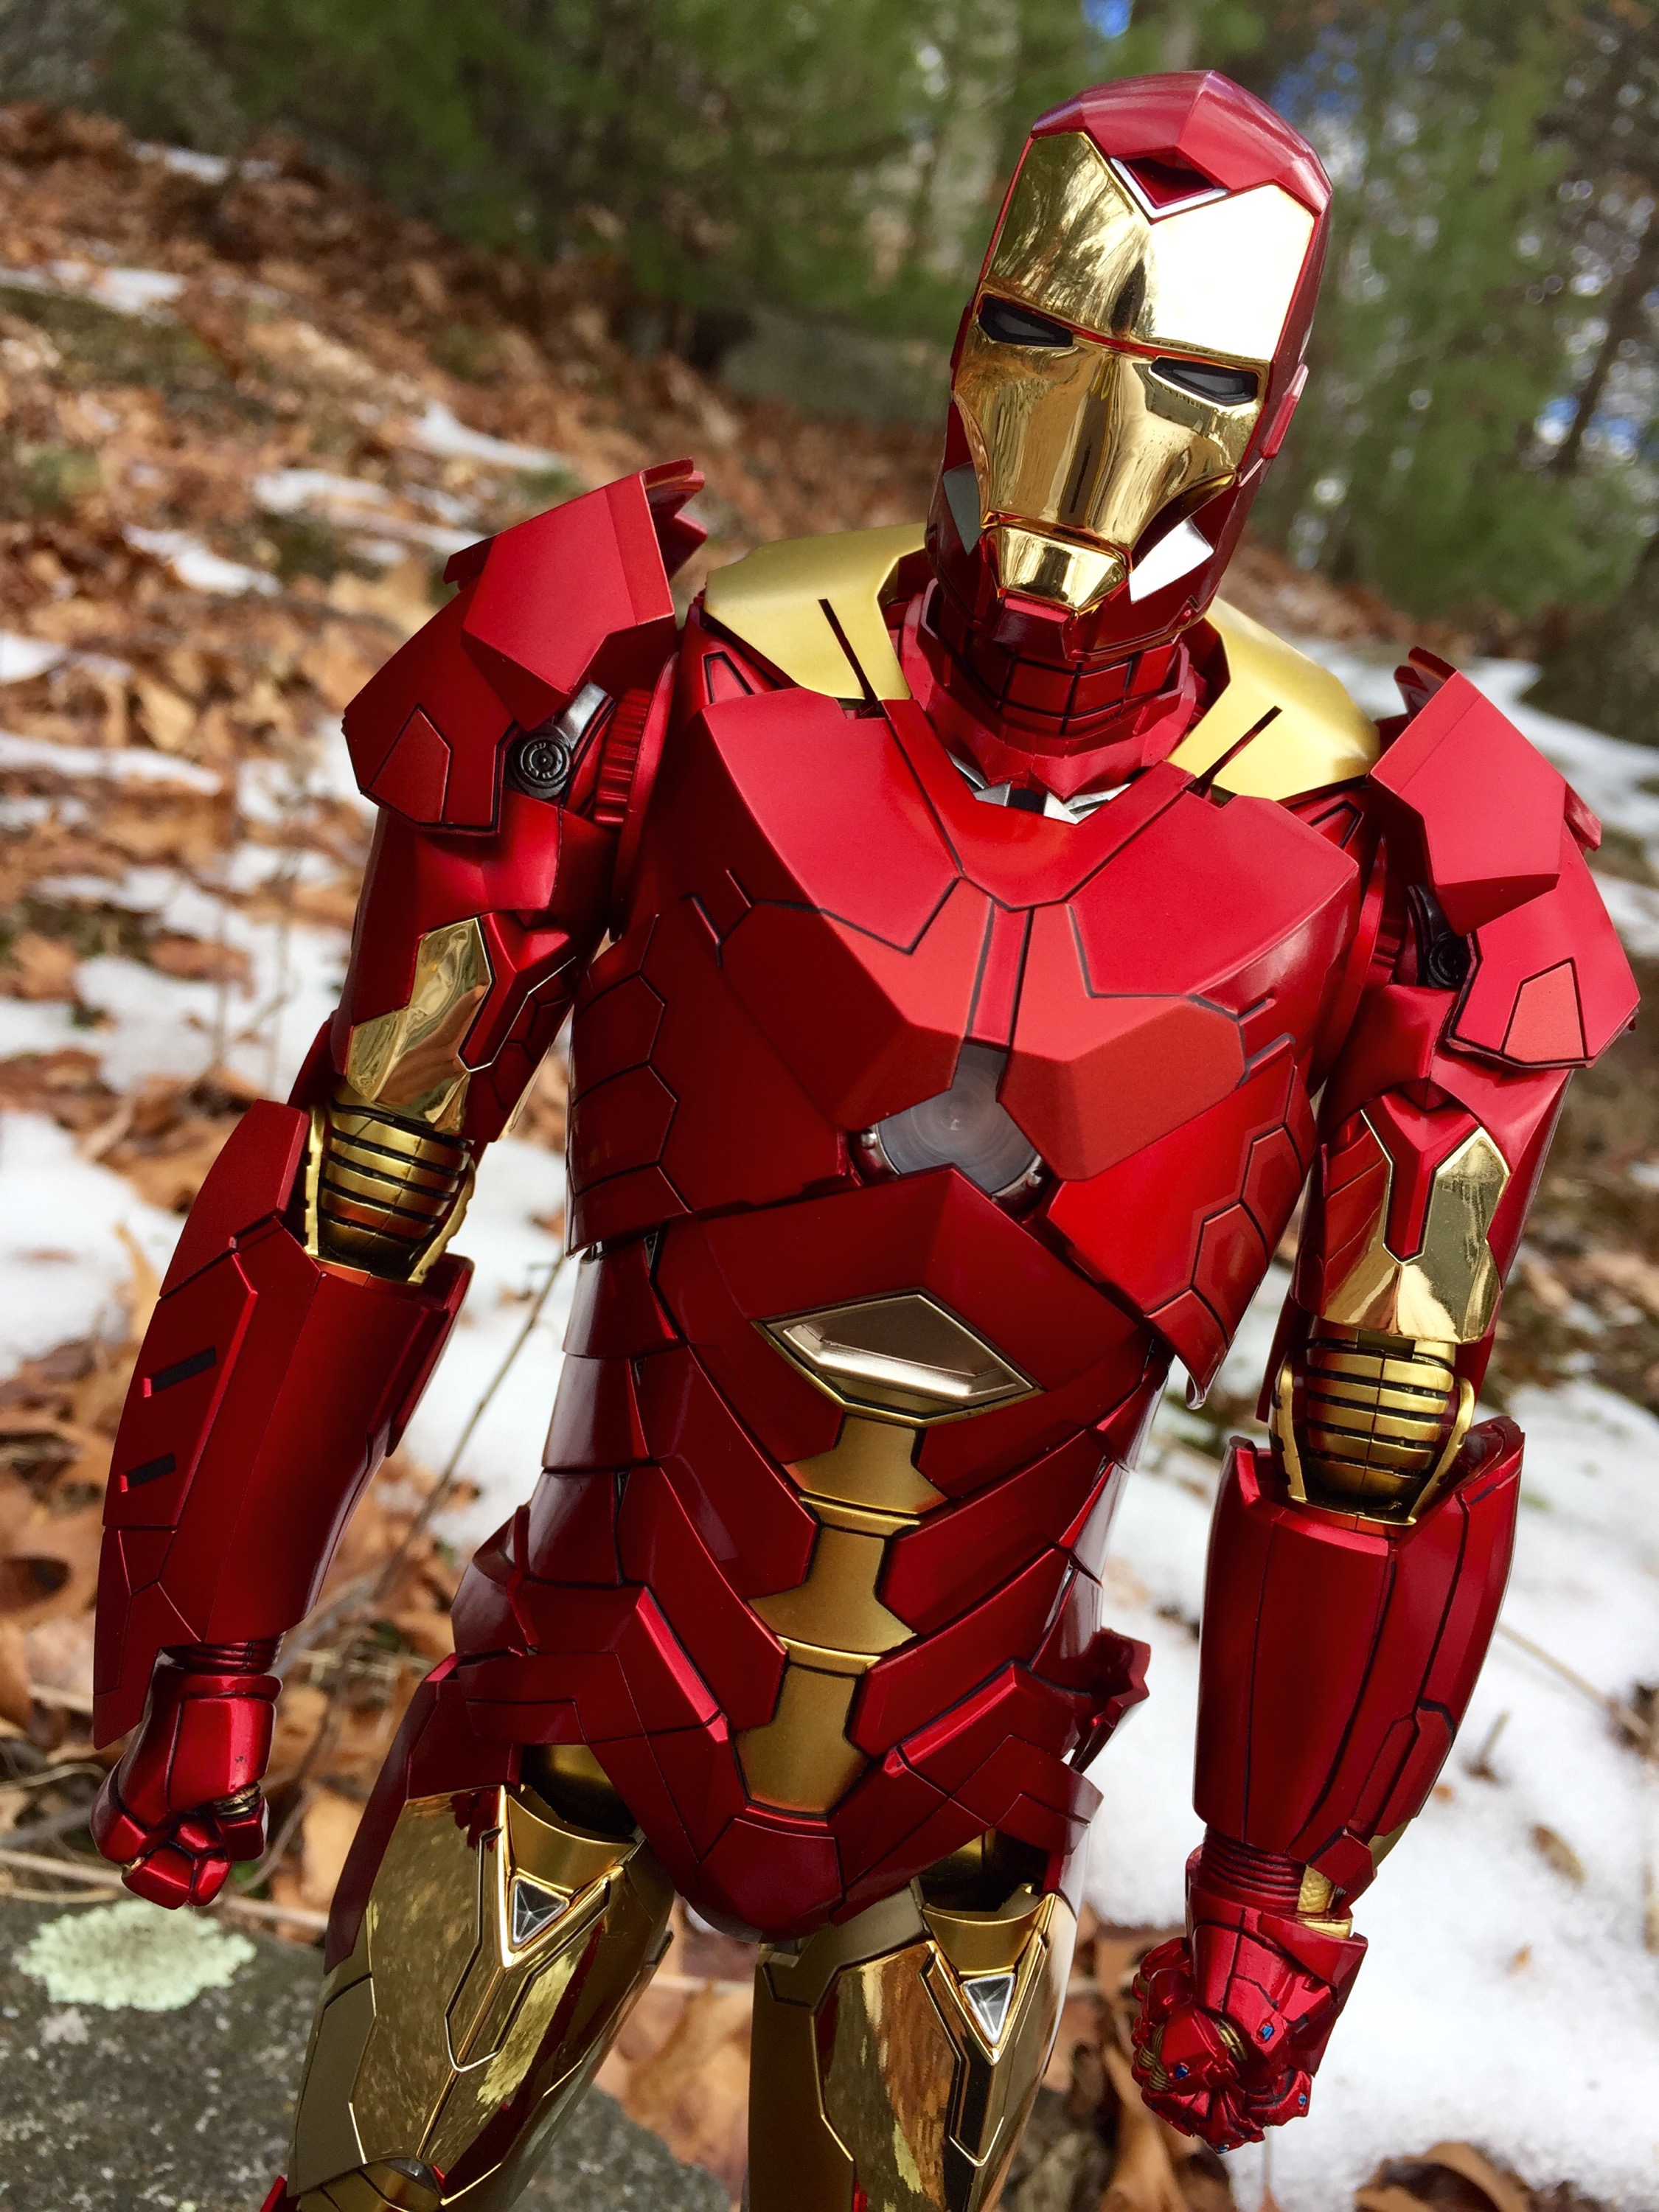 iron man action figure with removable armor